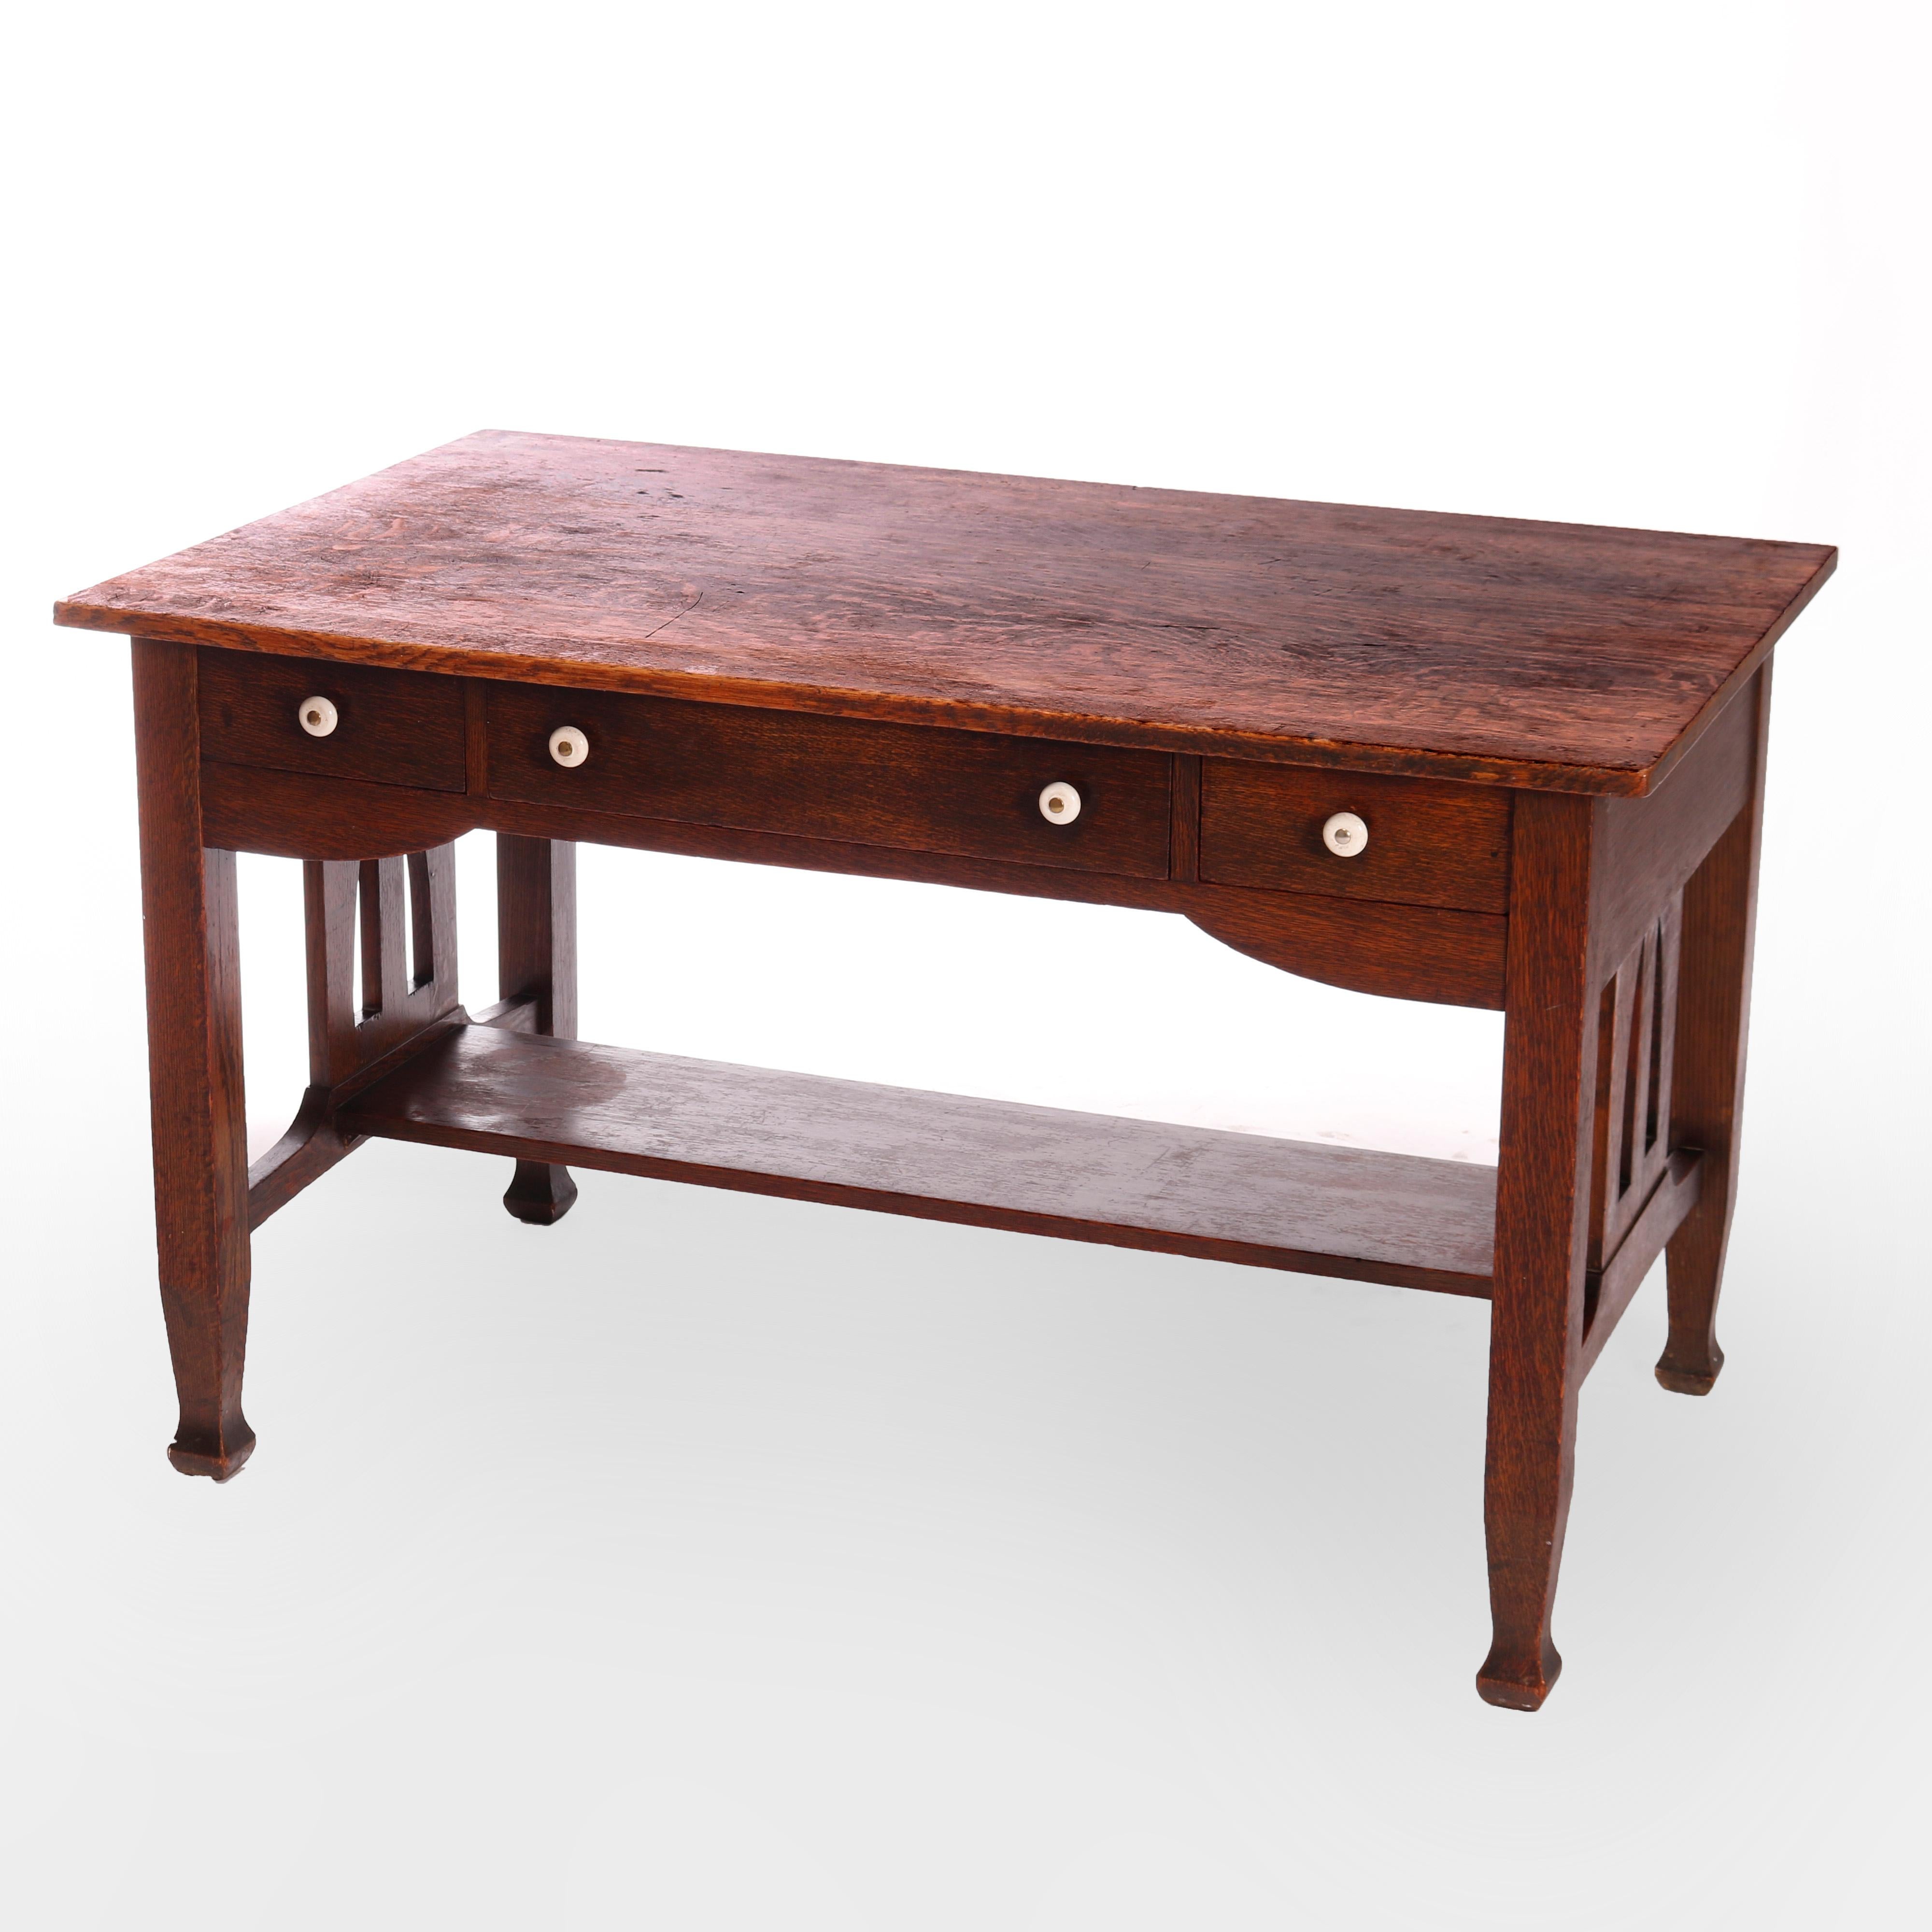 An antique Arts & Crafts library table by Bailey's offers quarter sawn oak construction with case having three drawers, raised on trestle base with cutout slat sides, lower shelf stretcher and Macmurdo feet, maker label as photographed,